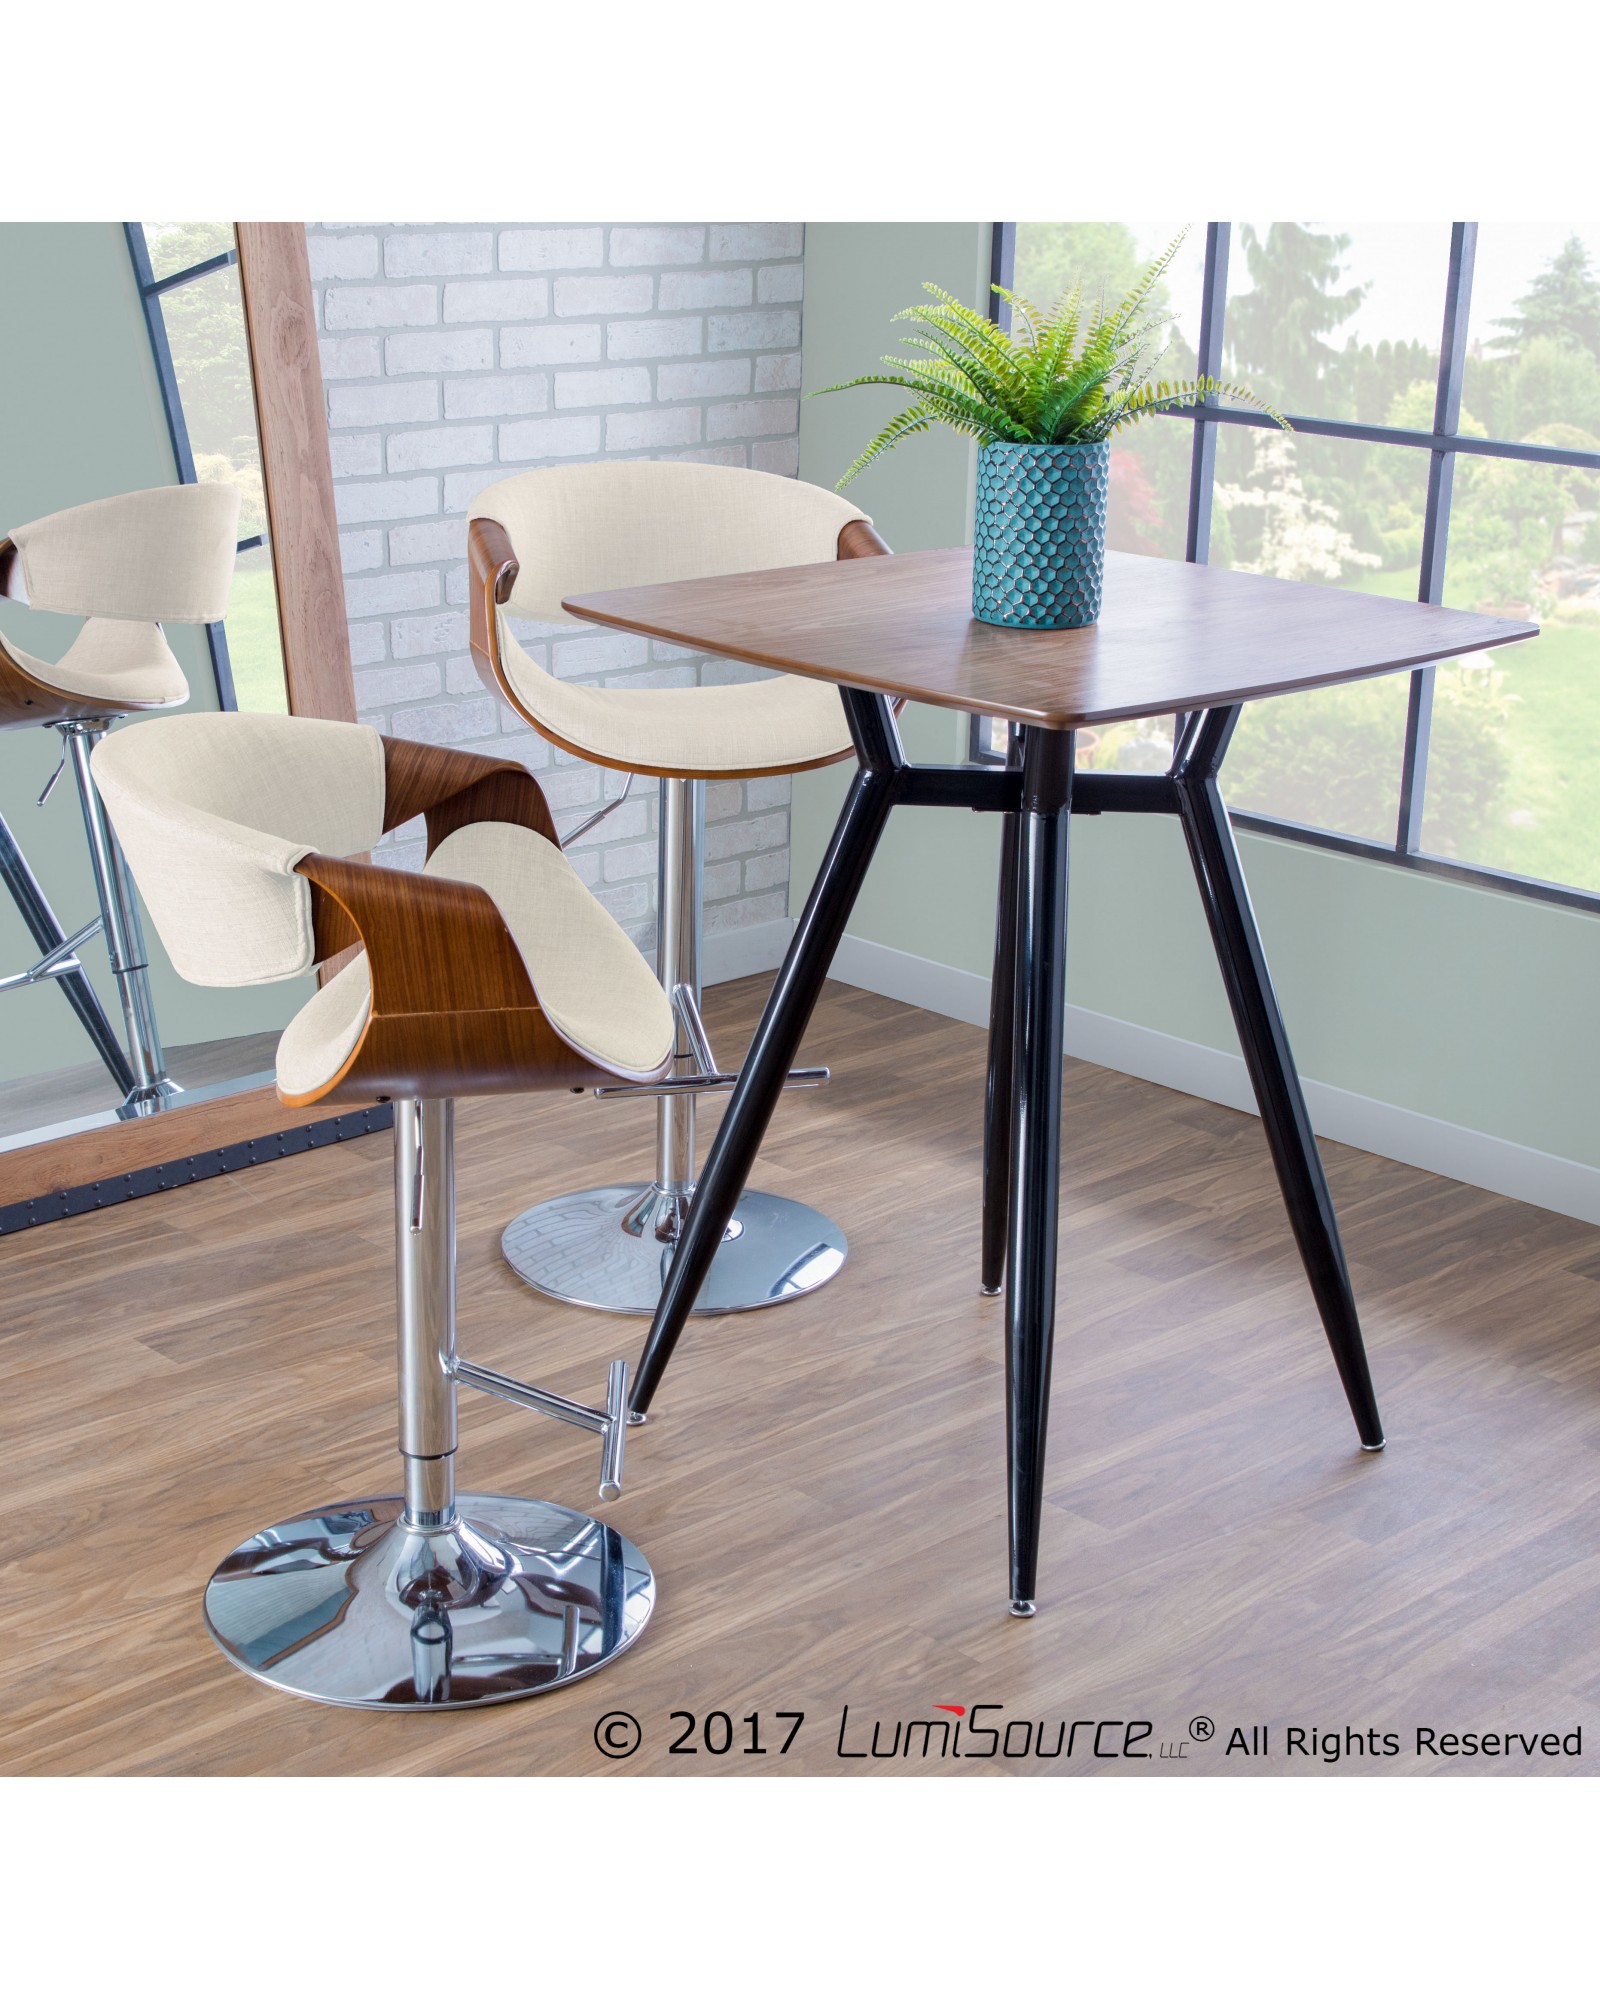 Clara Mid-Century Modern Square Counter Table with Black Metal Legs and Walnut Wood Top